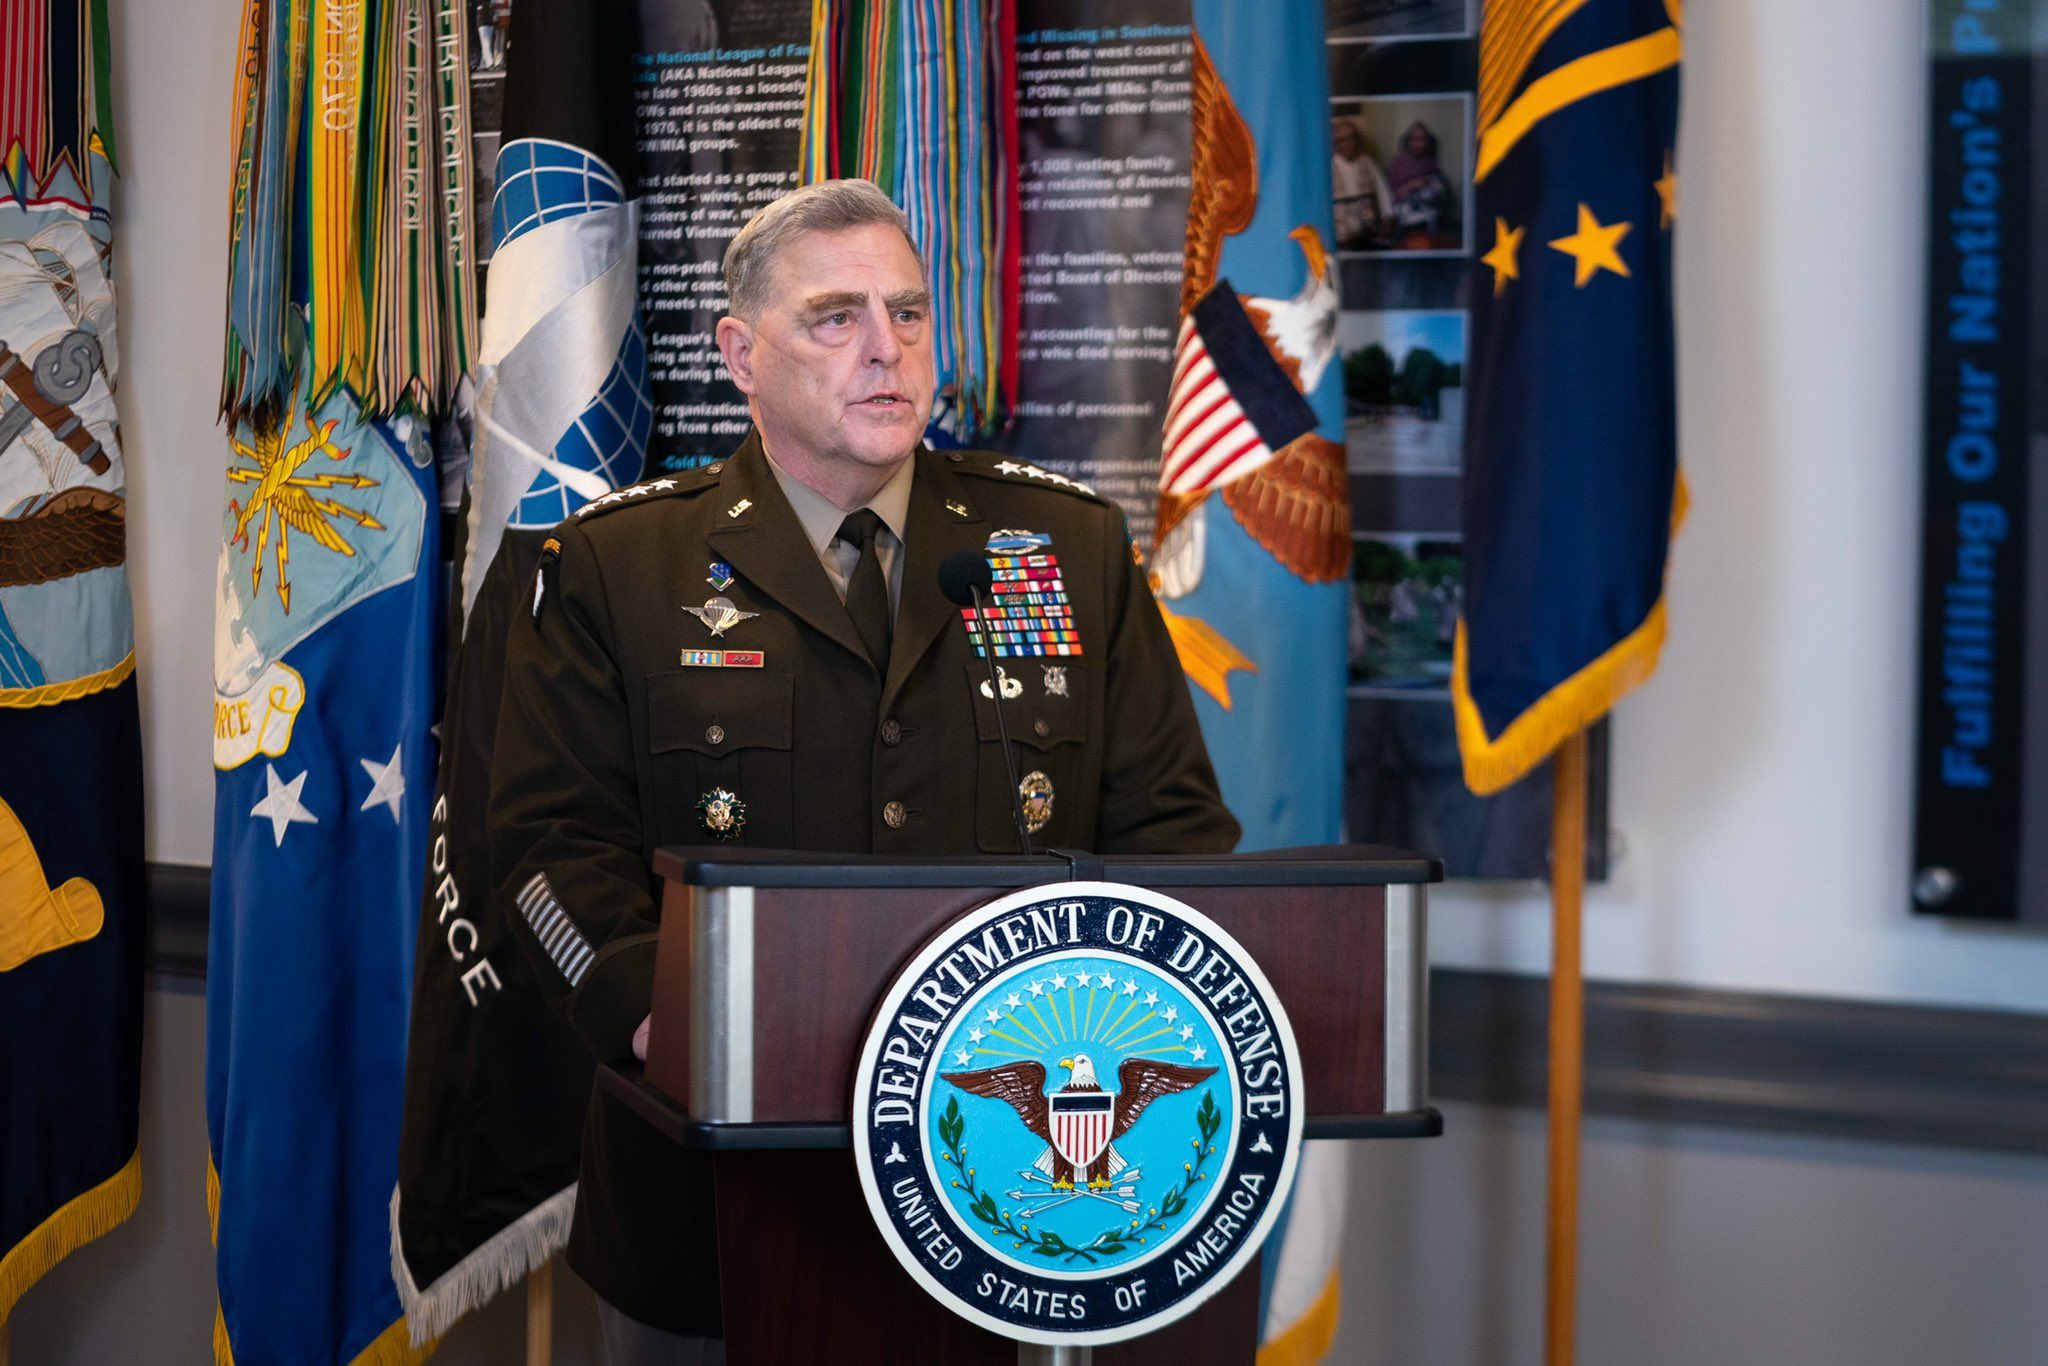 Who is General Mark Milley?